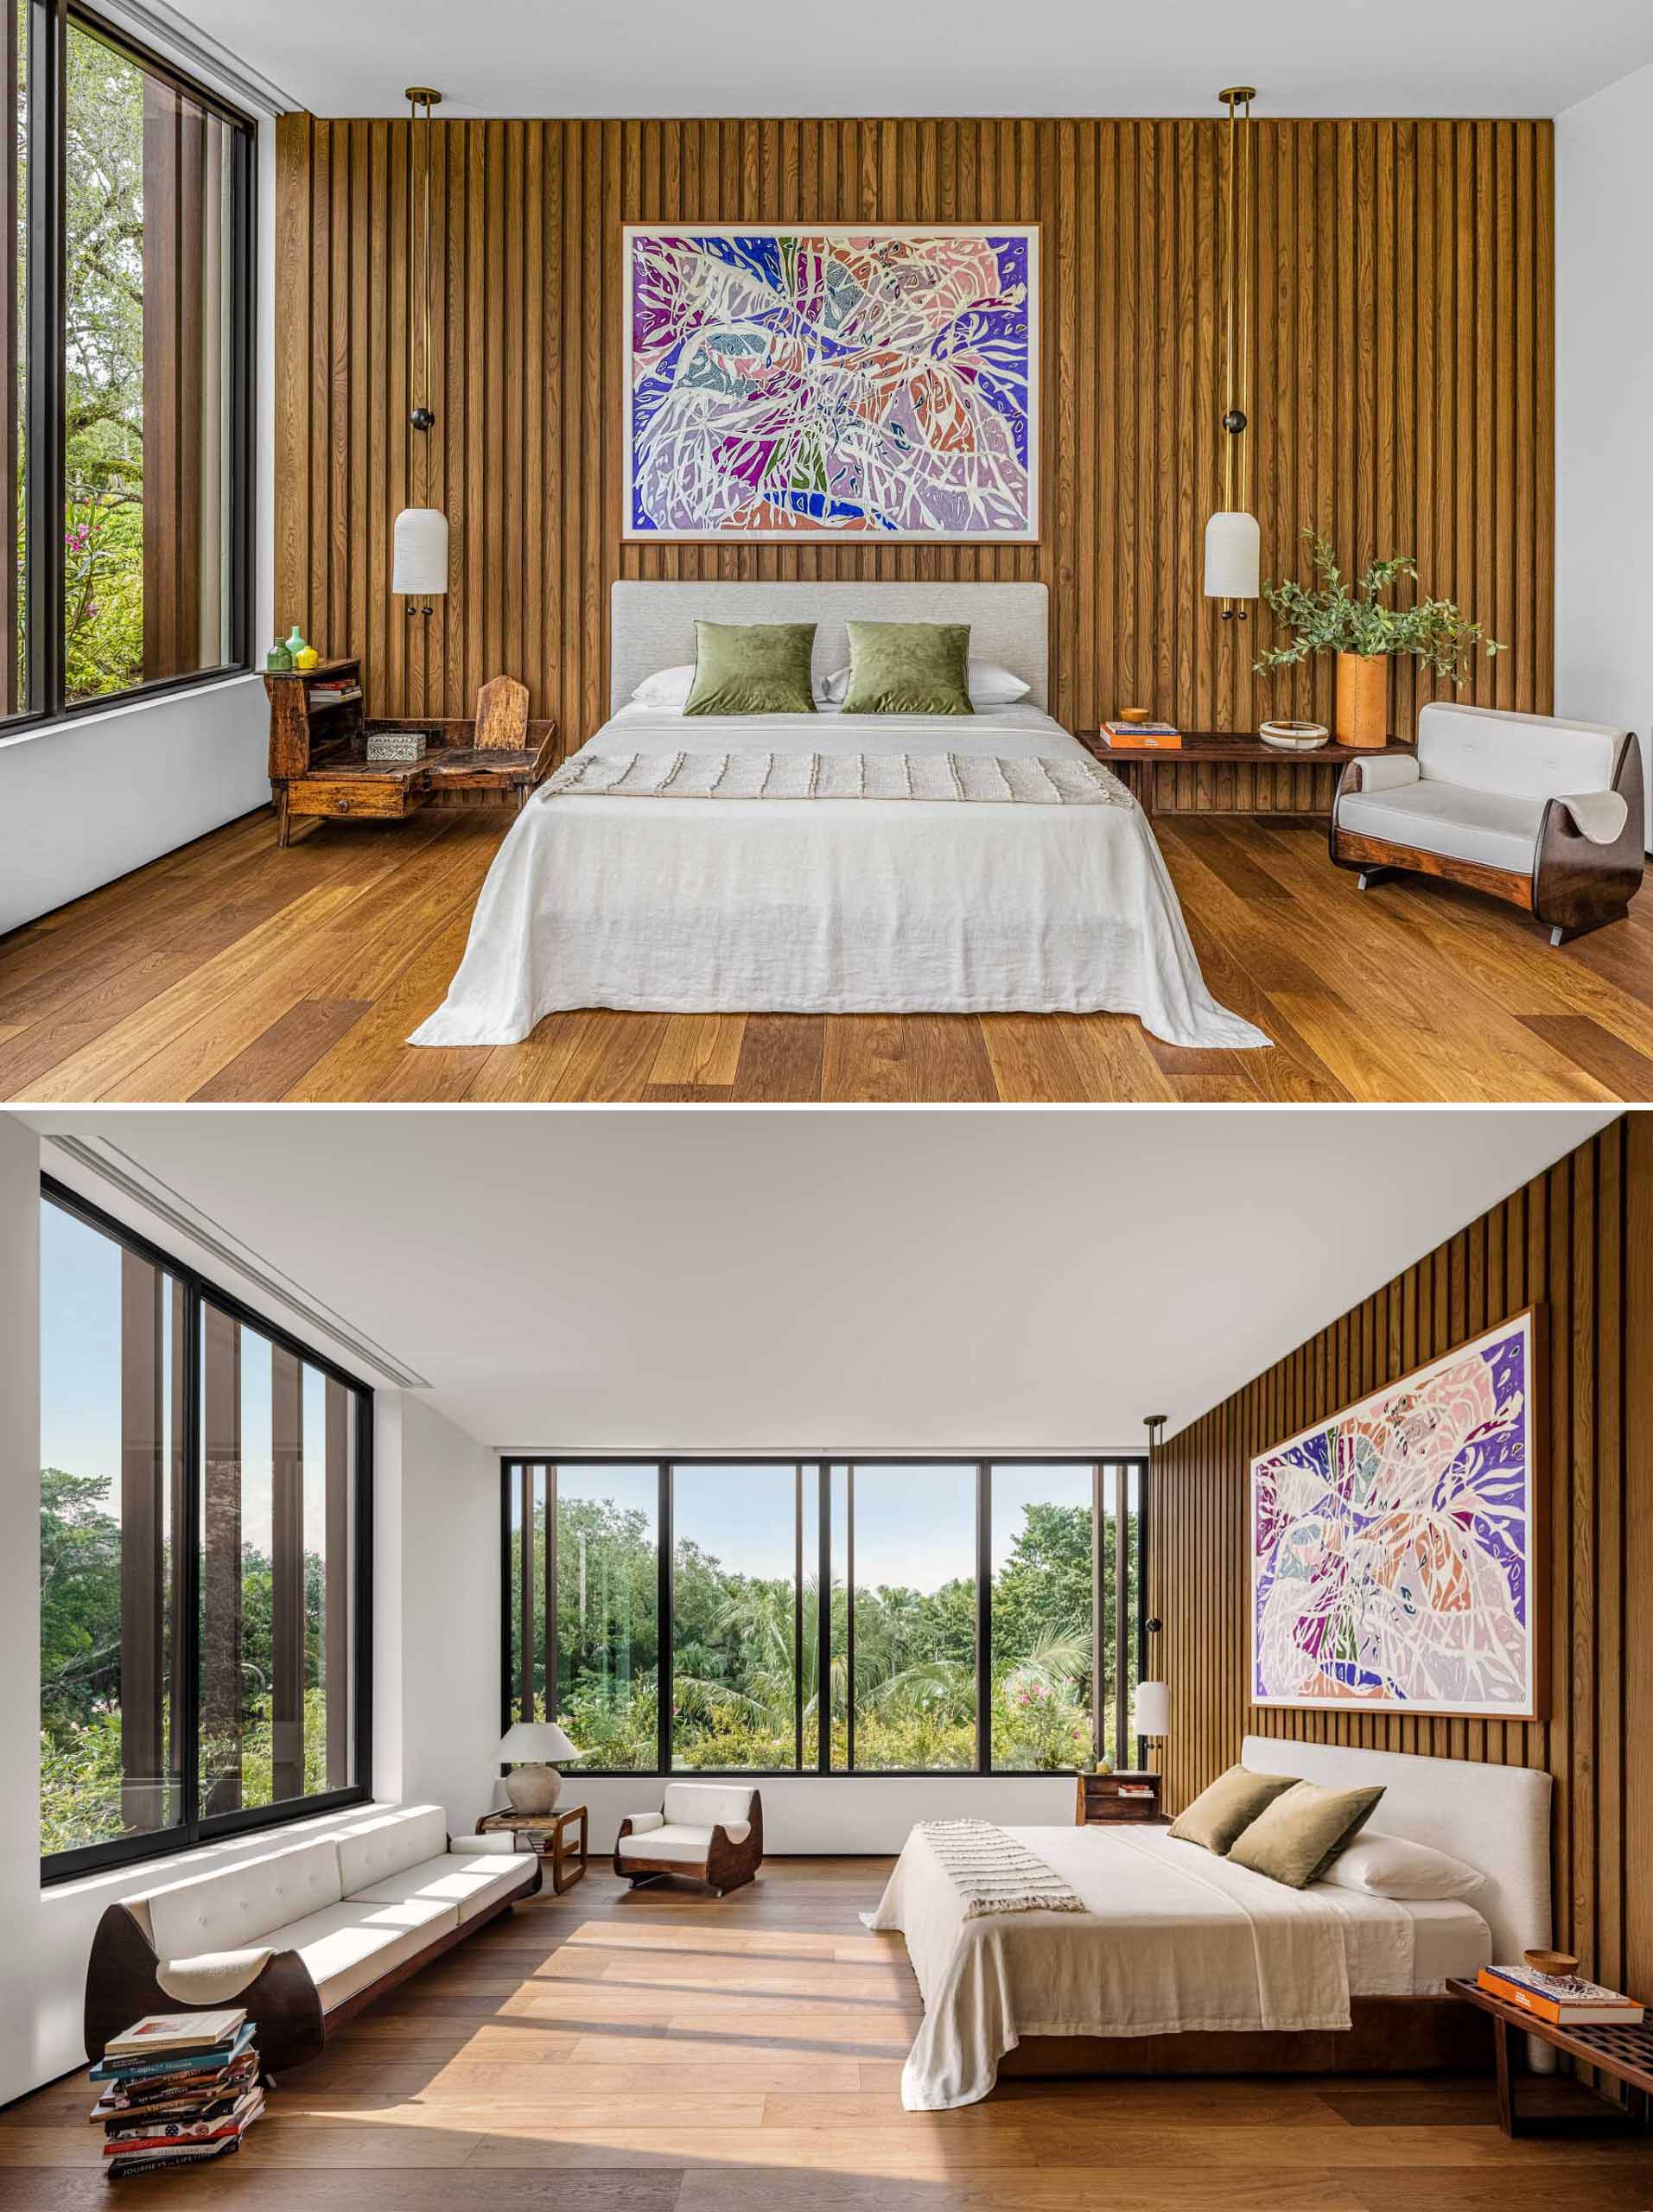 In this primary bedroom, wood lines the wall, while the light fixtures are by Apparatus Studio and the painting is by Marcia de Moraes. George Nelson benches serve as bedside tables.